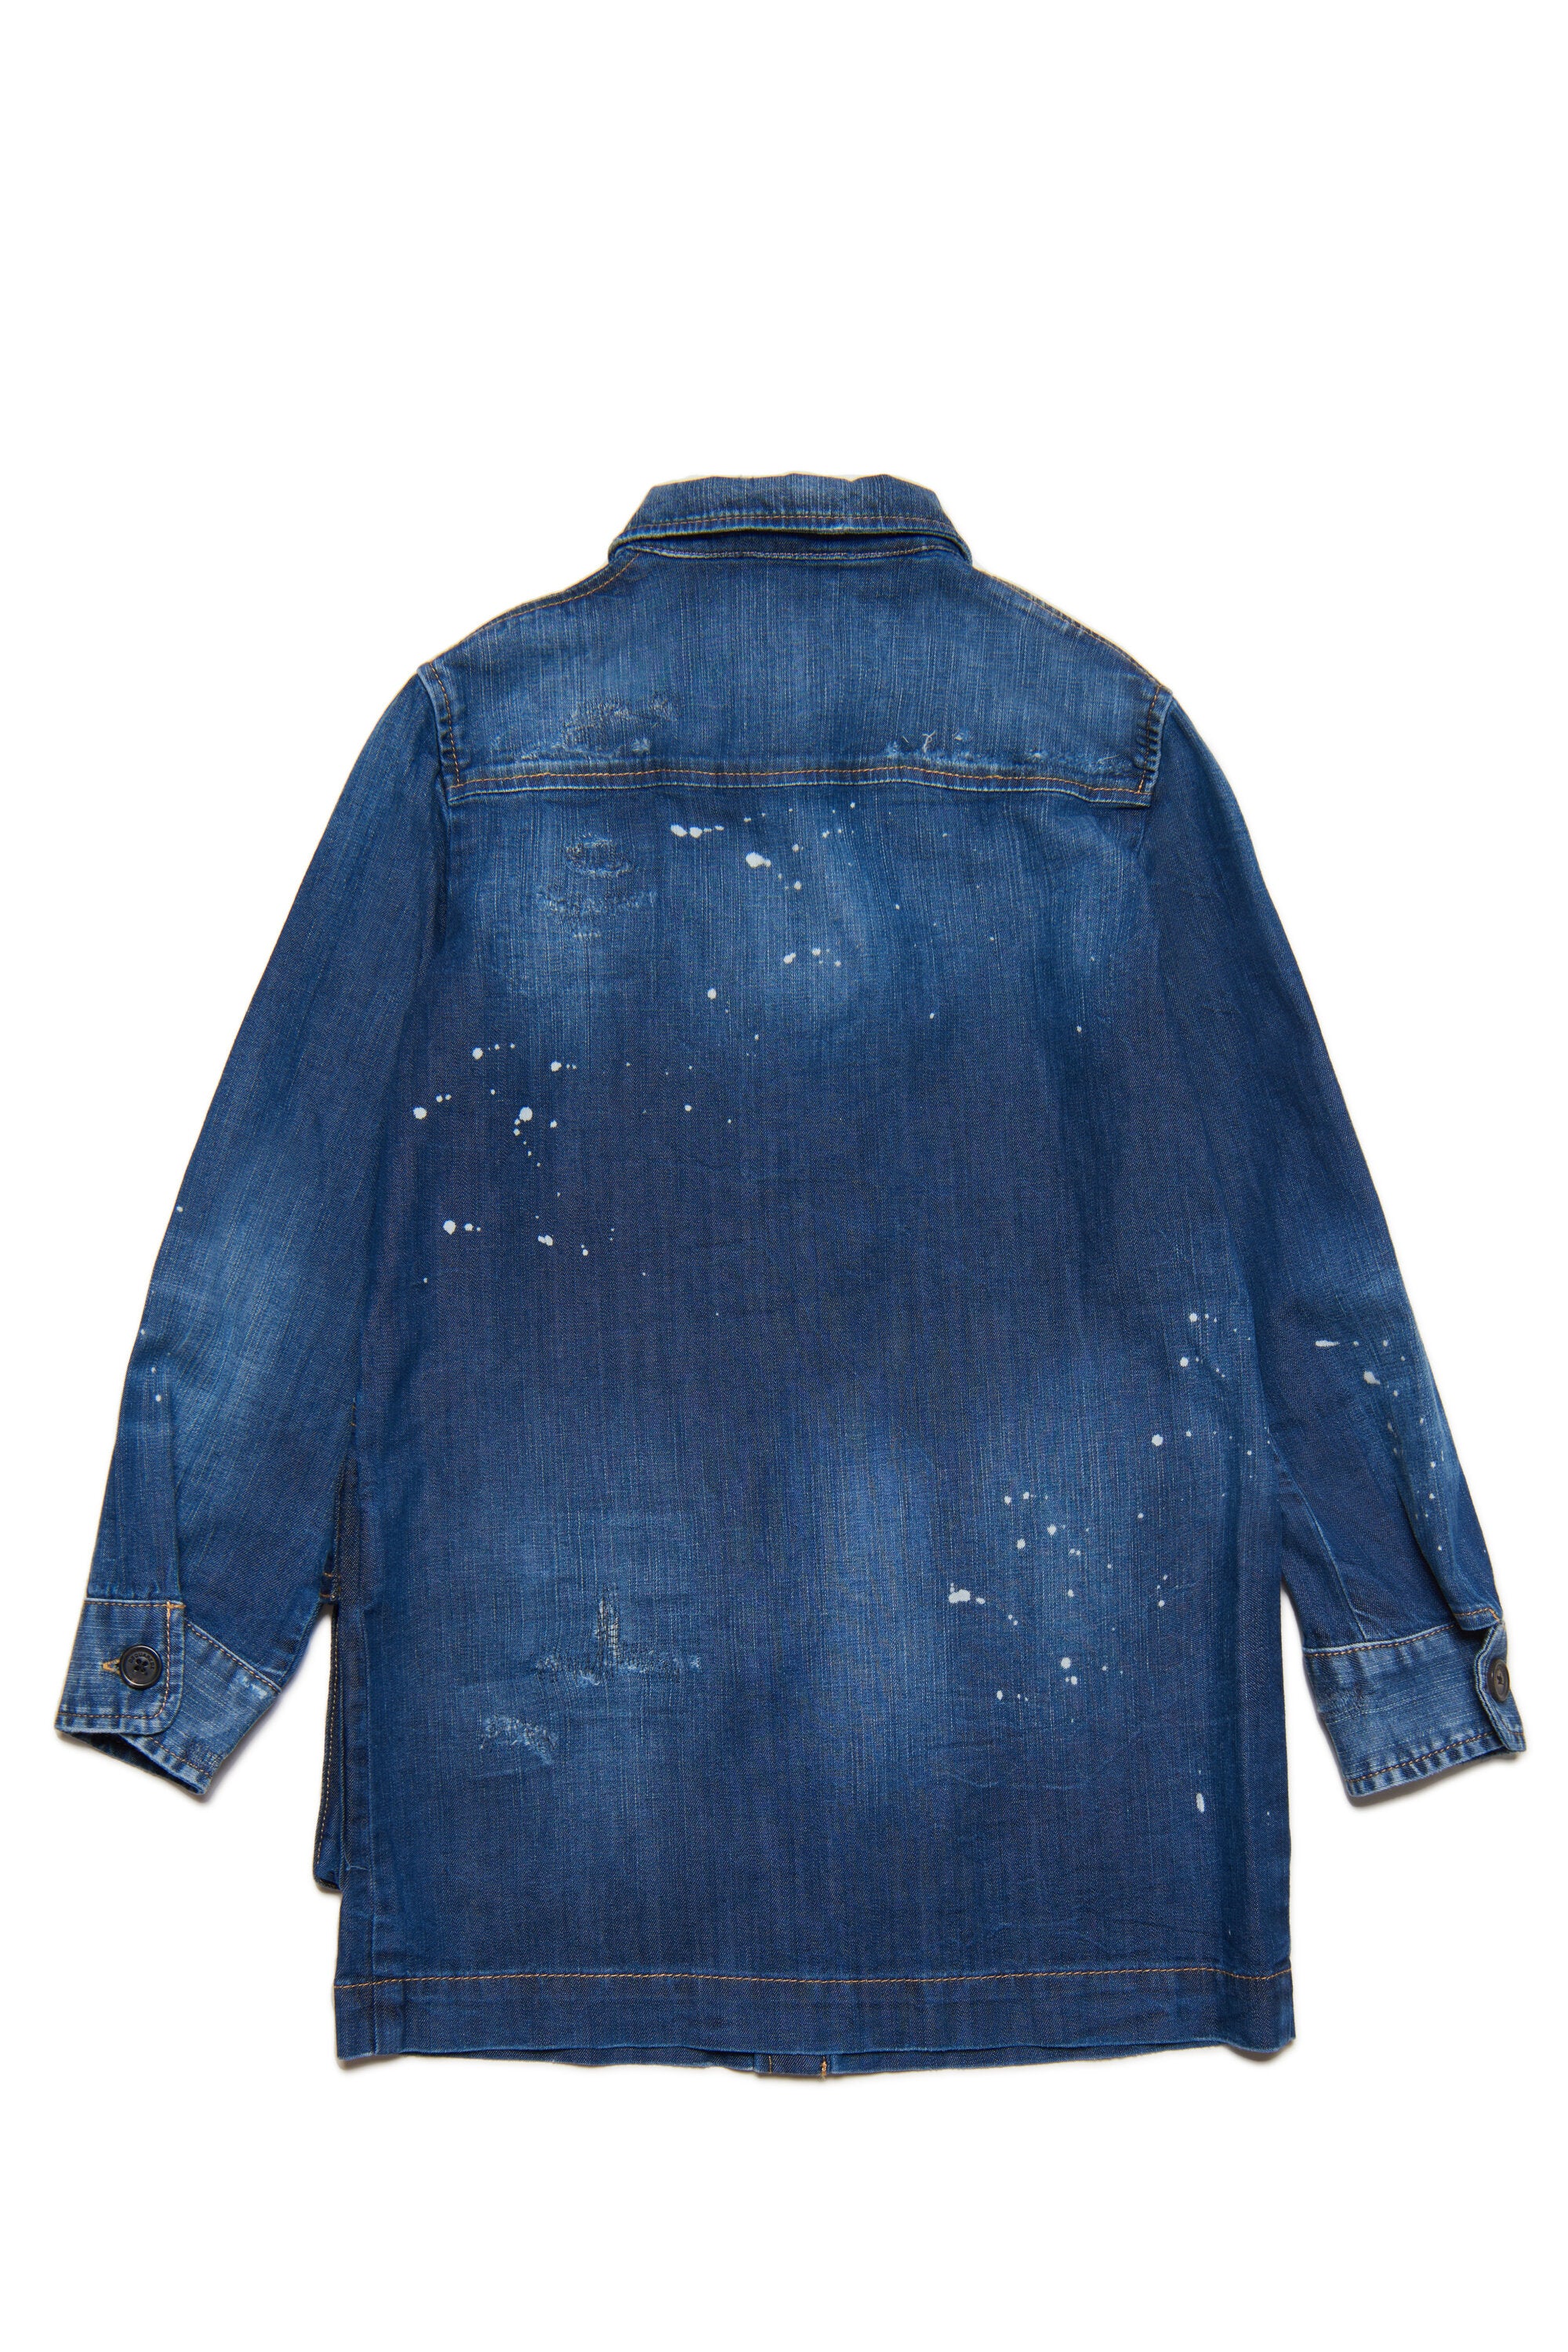 Shaded dark blue denim chemisier dress with abrasion and stains